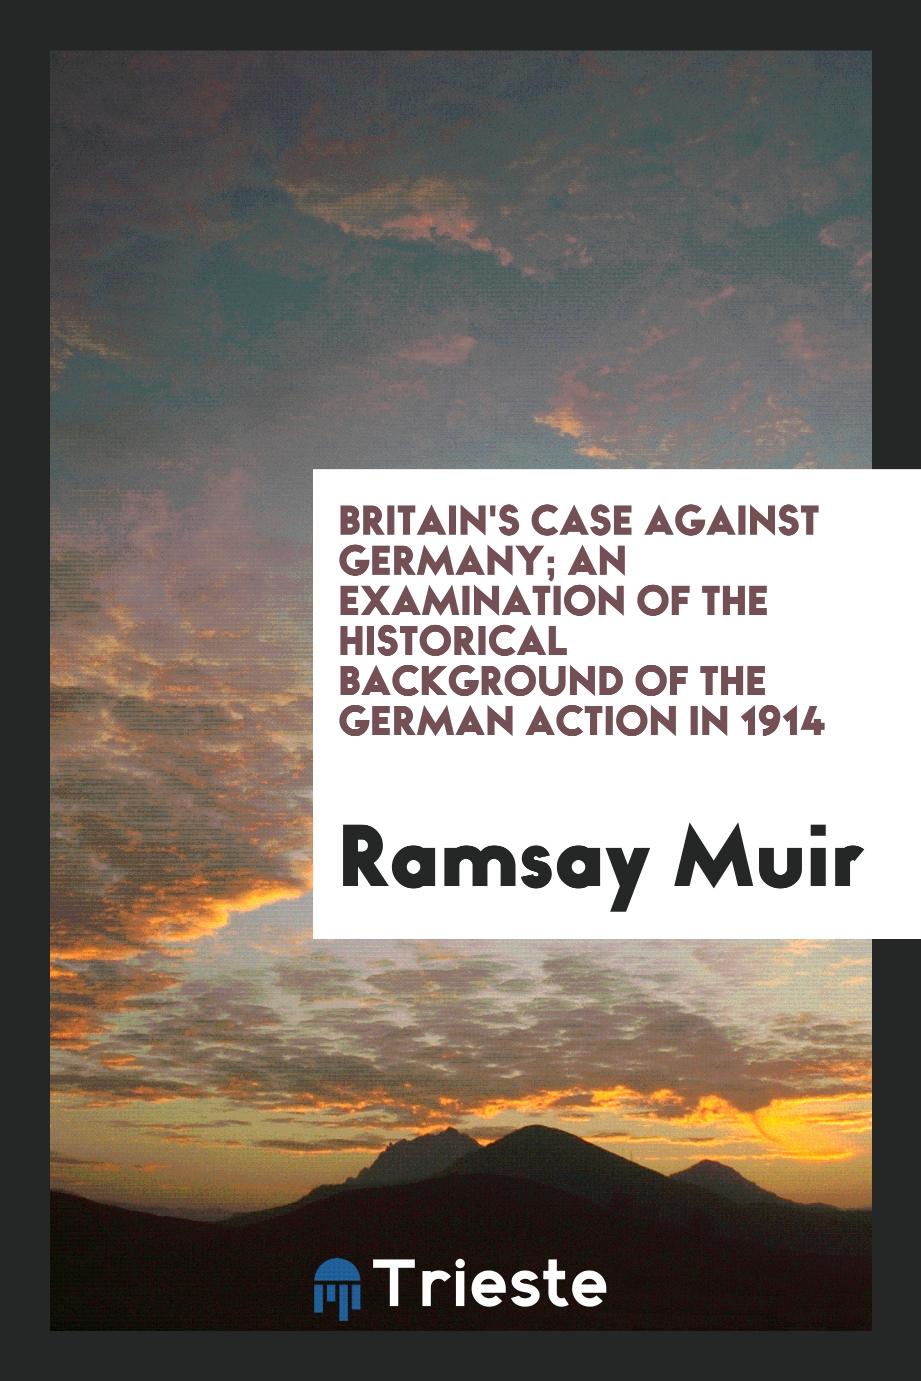 Britain's case against Germany; an examination of the historical background of the German action in 1914